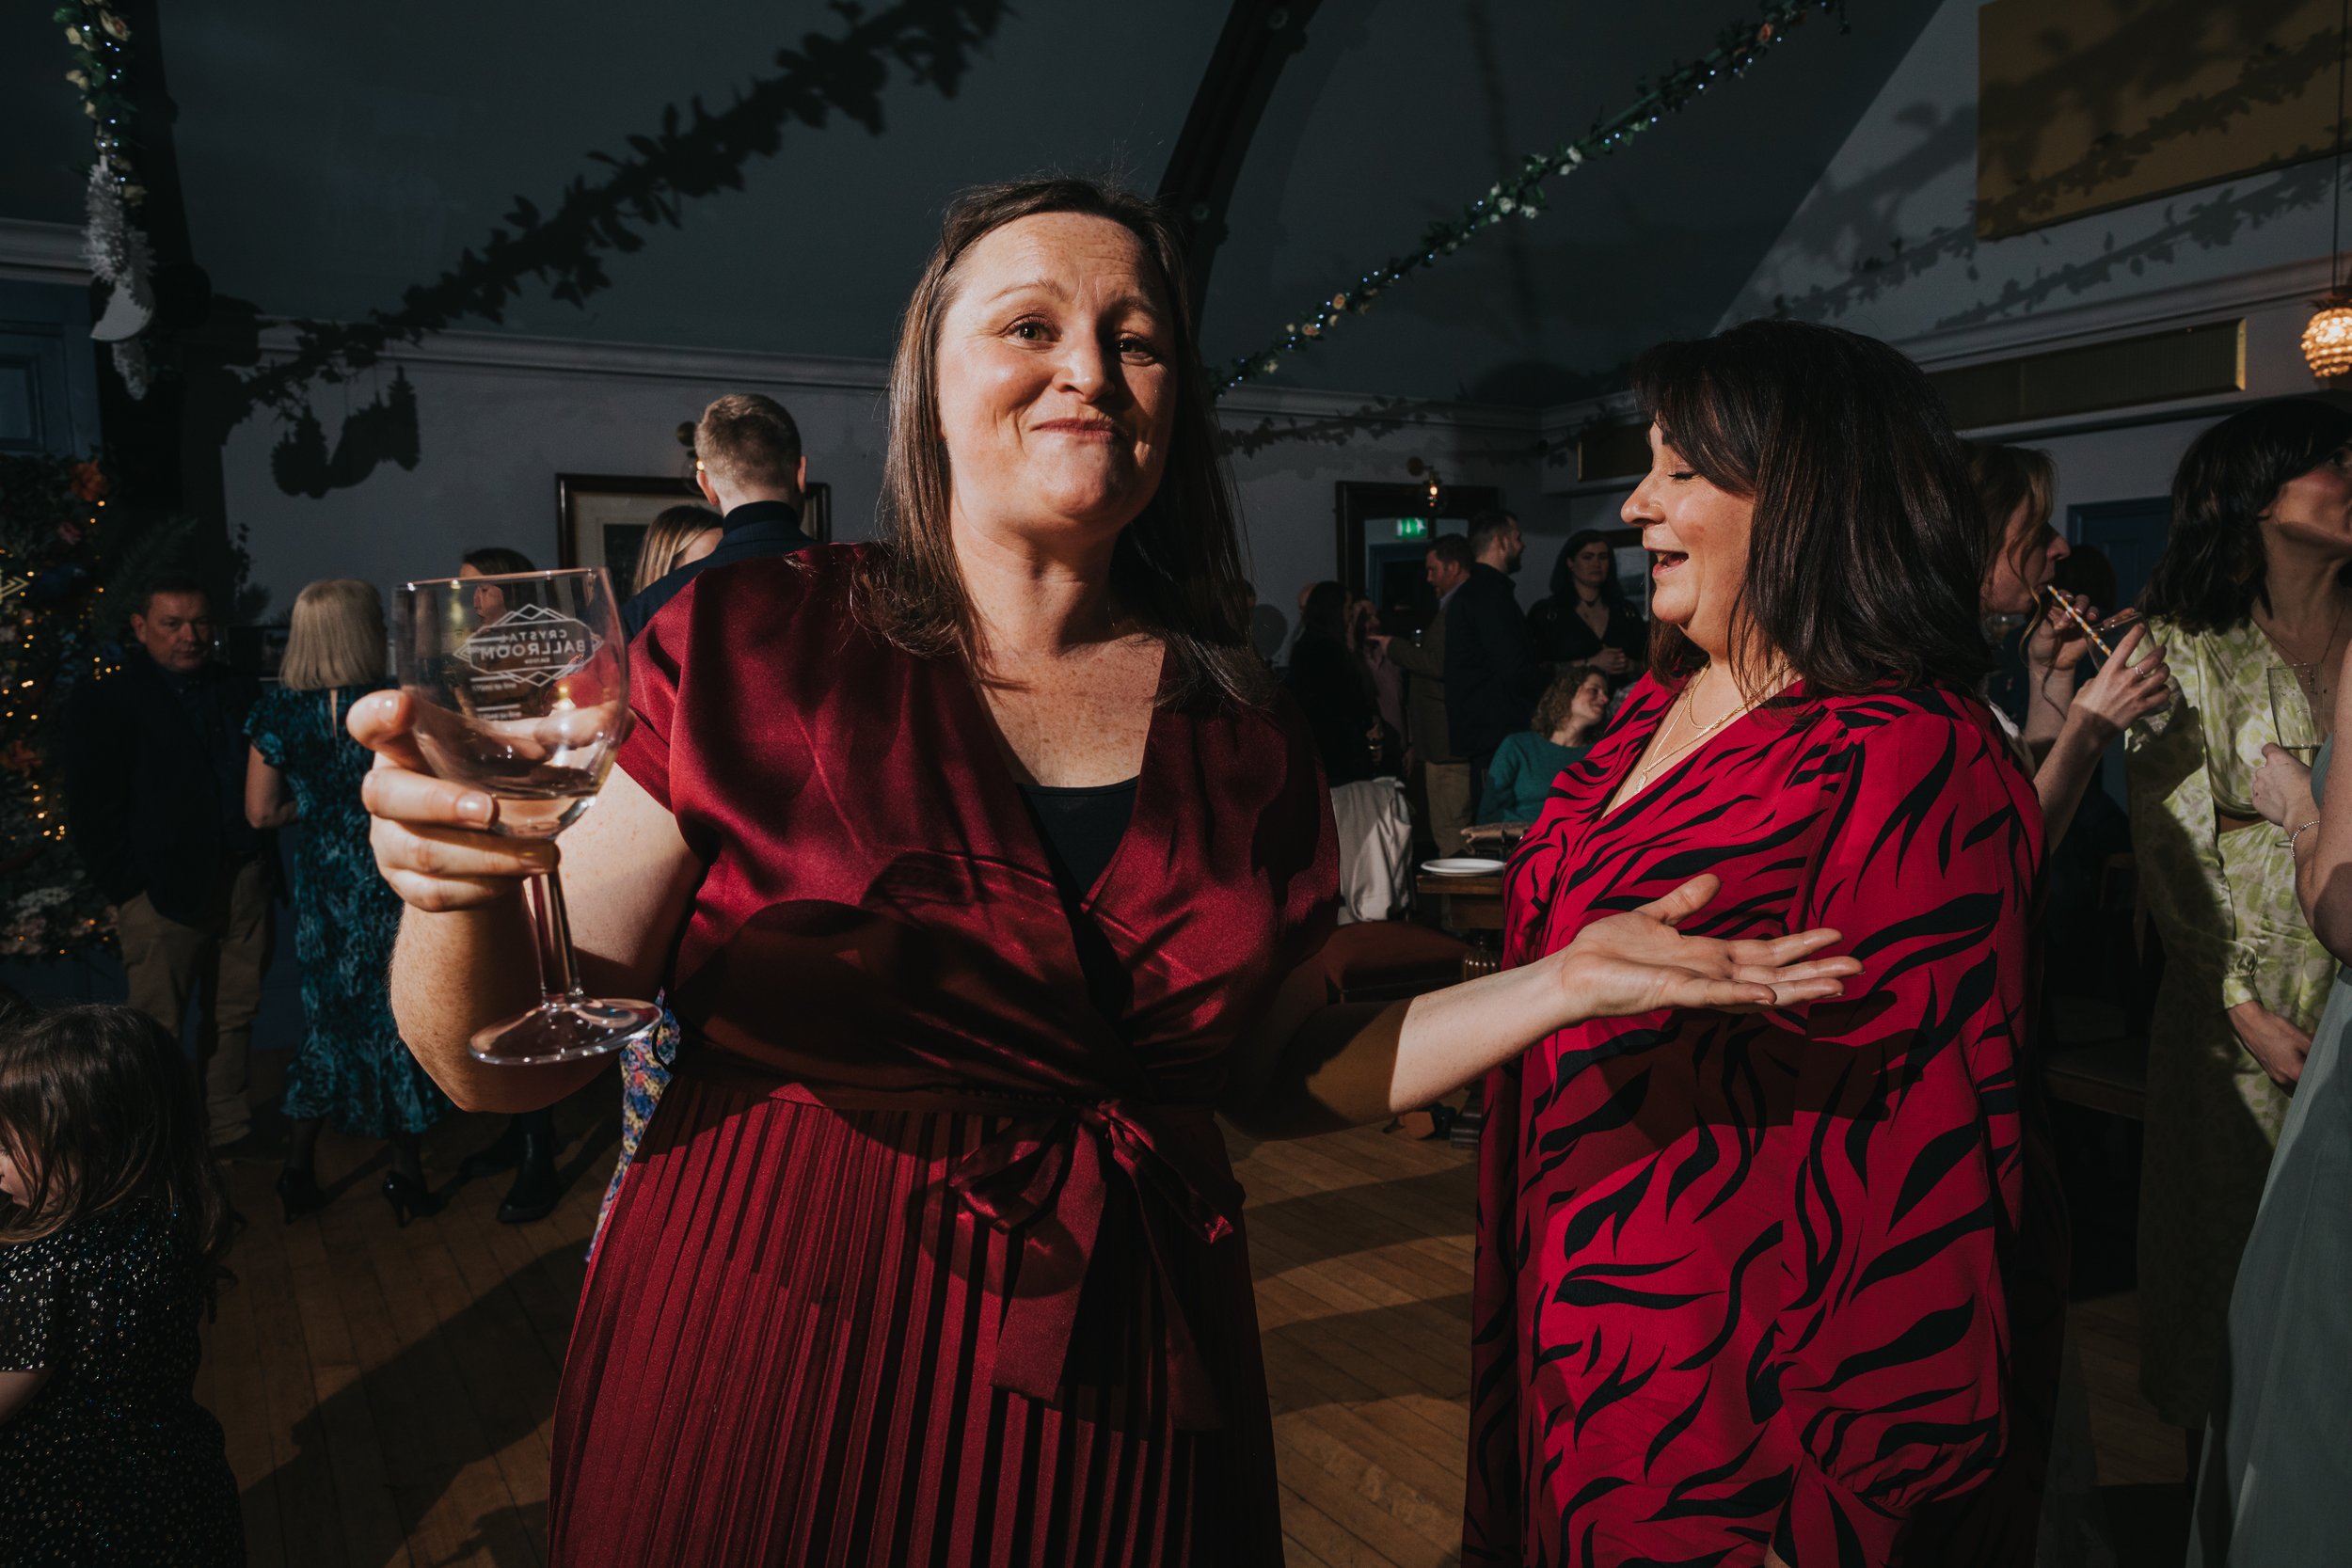 Wedding guest dancing with a drink in her hand wearing a red dress. 